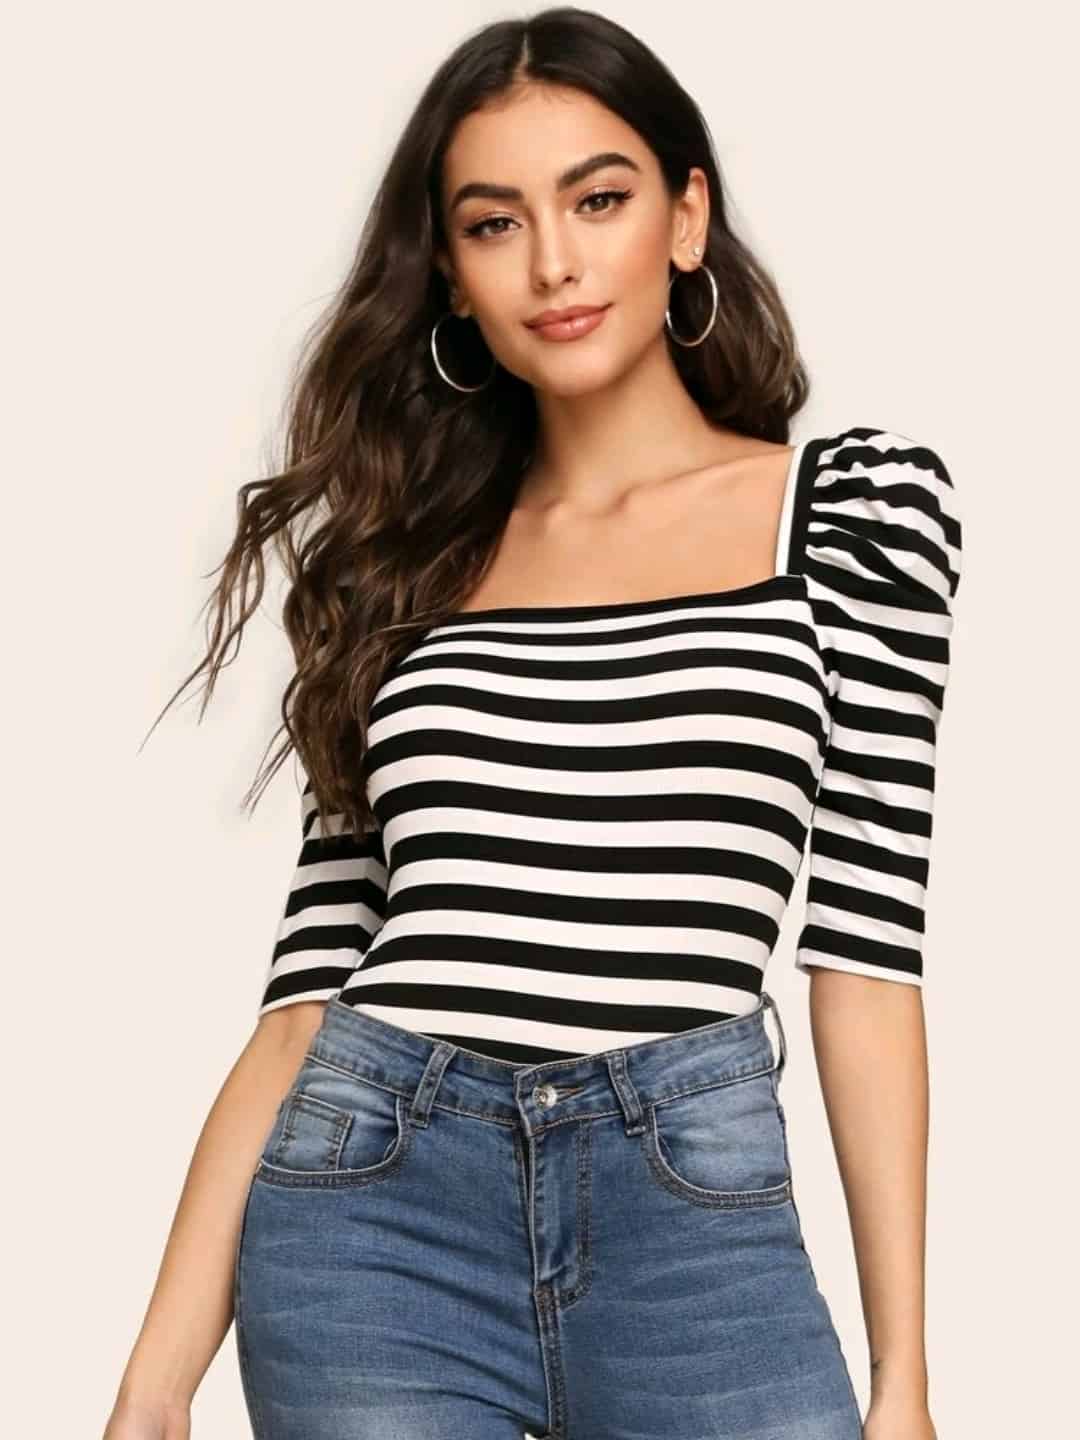 SHEIN Puff Sleeve Square Neck Top